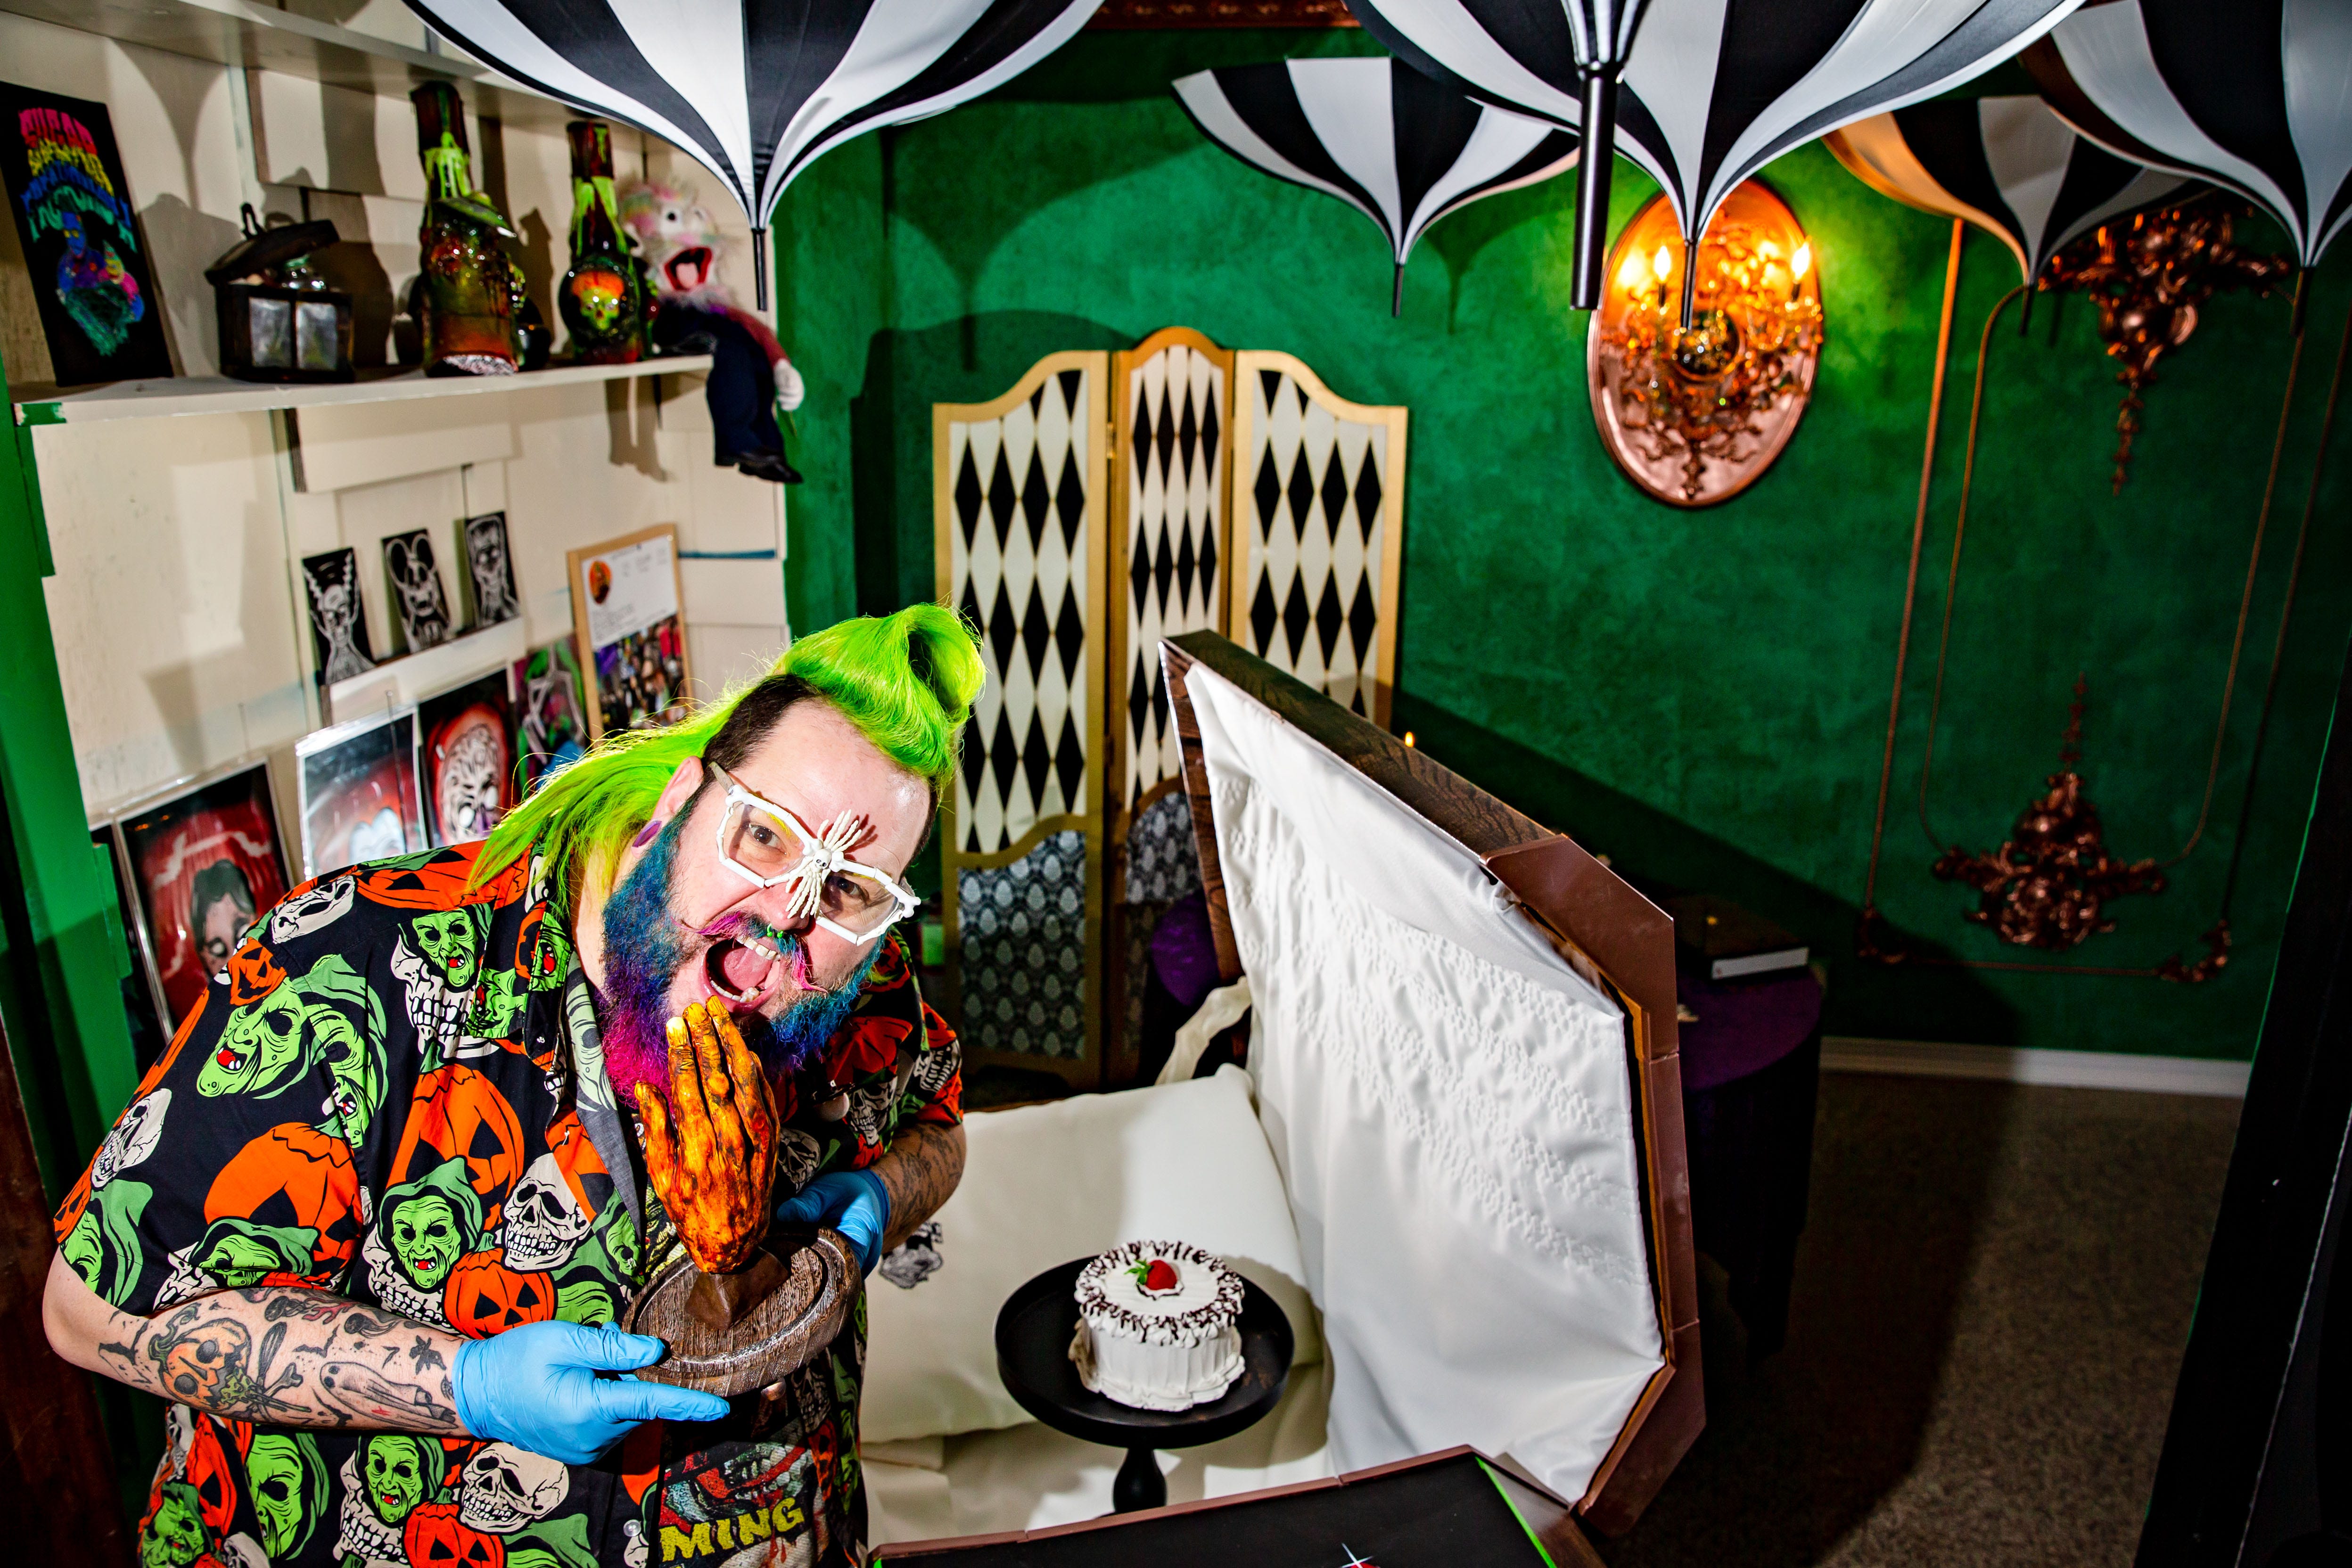 Andrew Fuller poses for a photo at his baking studio, Sugar Freakshow, at 3023 S.W. Ninth St. in Des Moines.